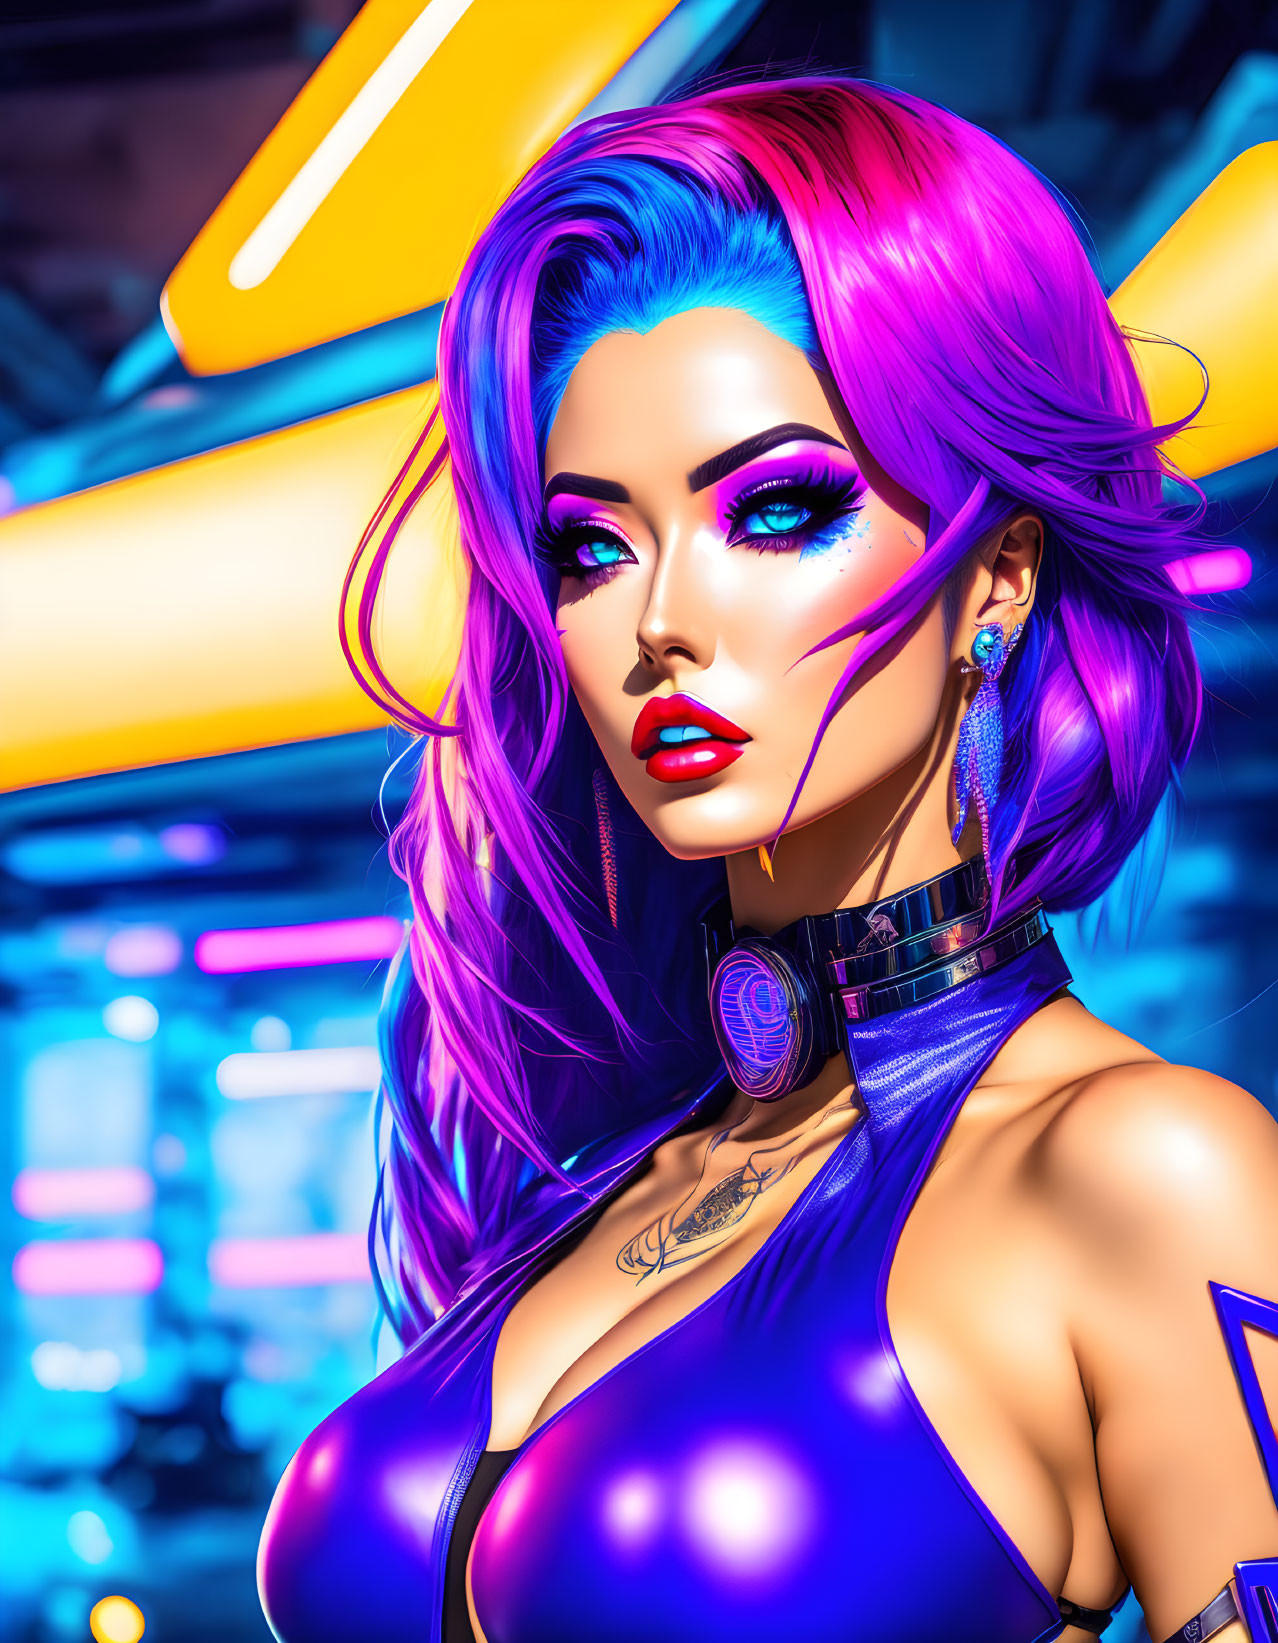 Colorful digital artwork: woman with pink hair, blue eyes, neon makeup on futuristic blue backdrop